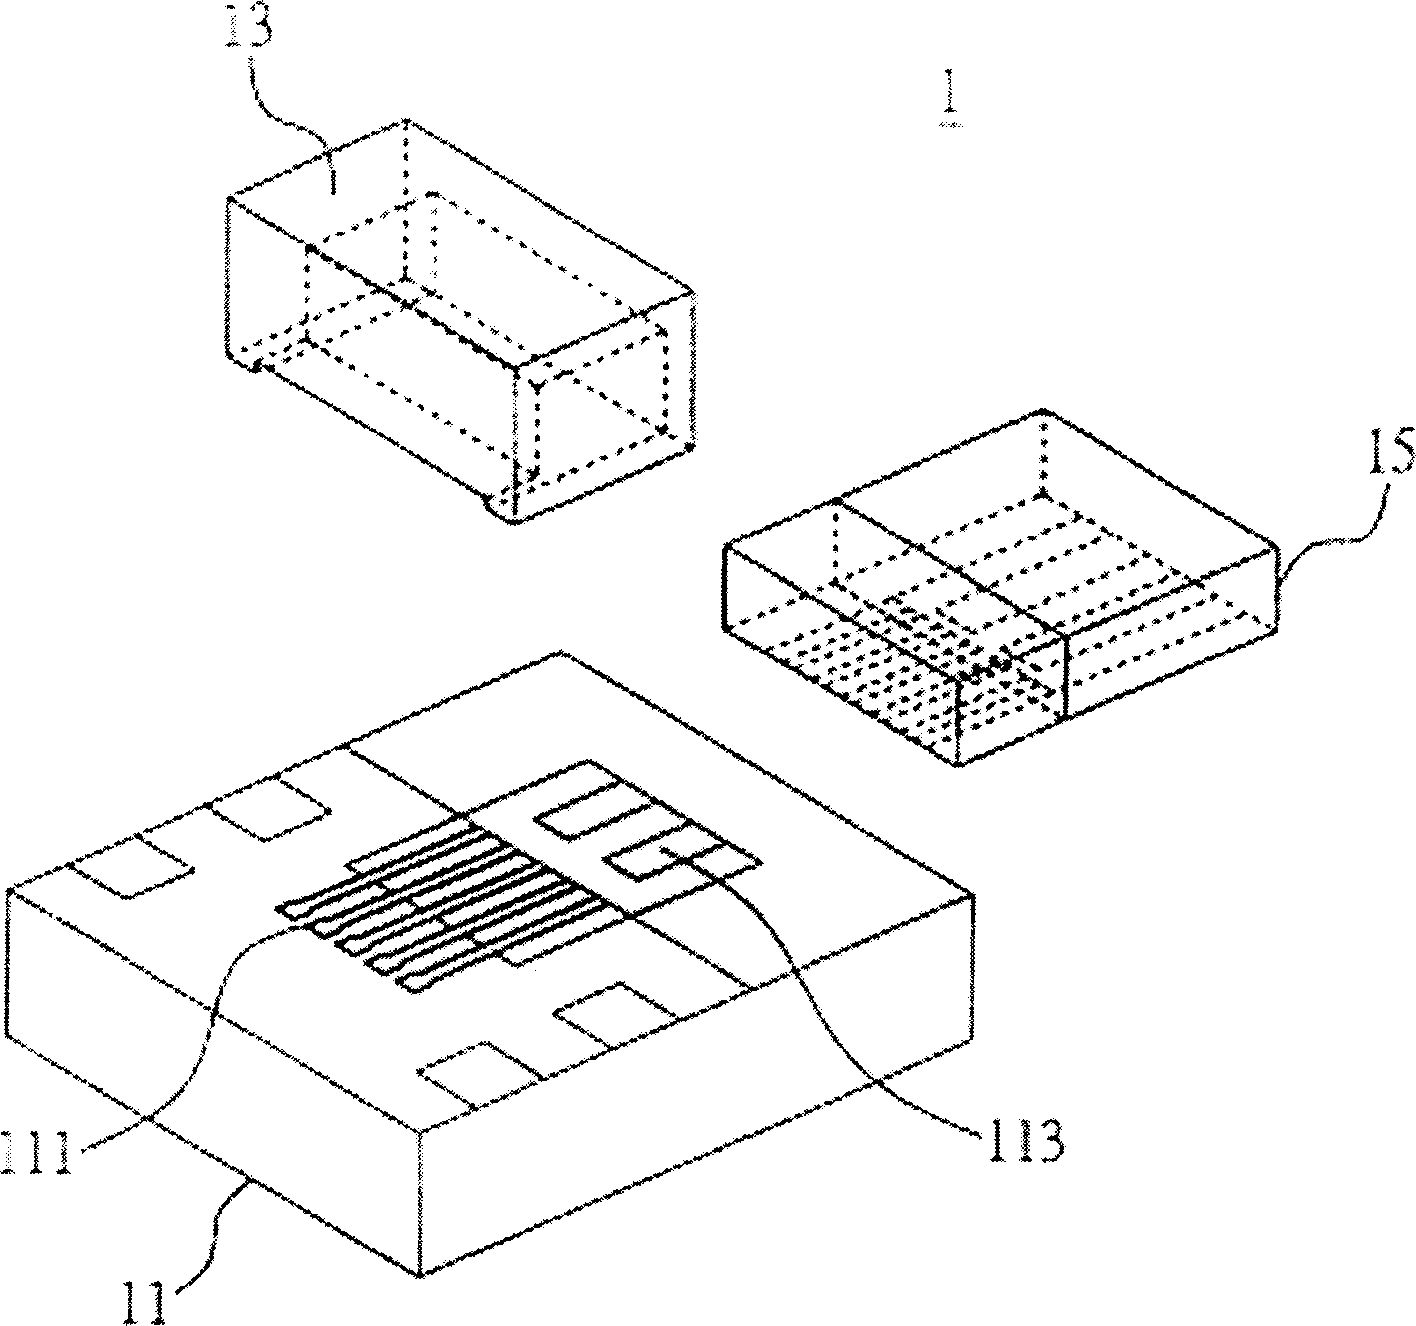 Production of micro-connector and its terminal shape